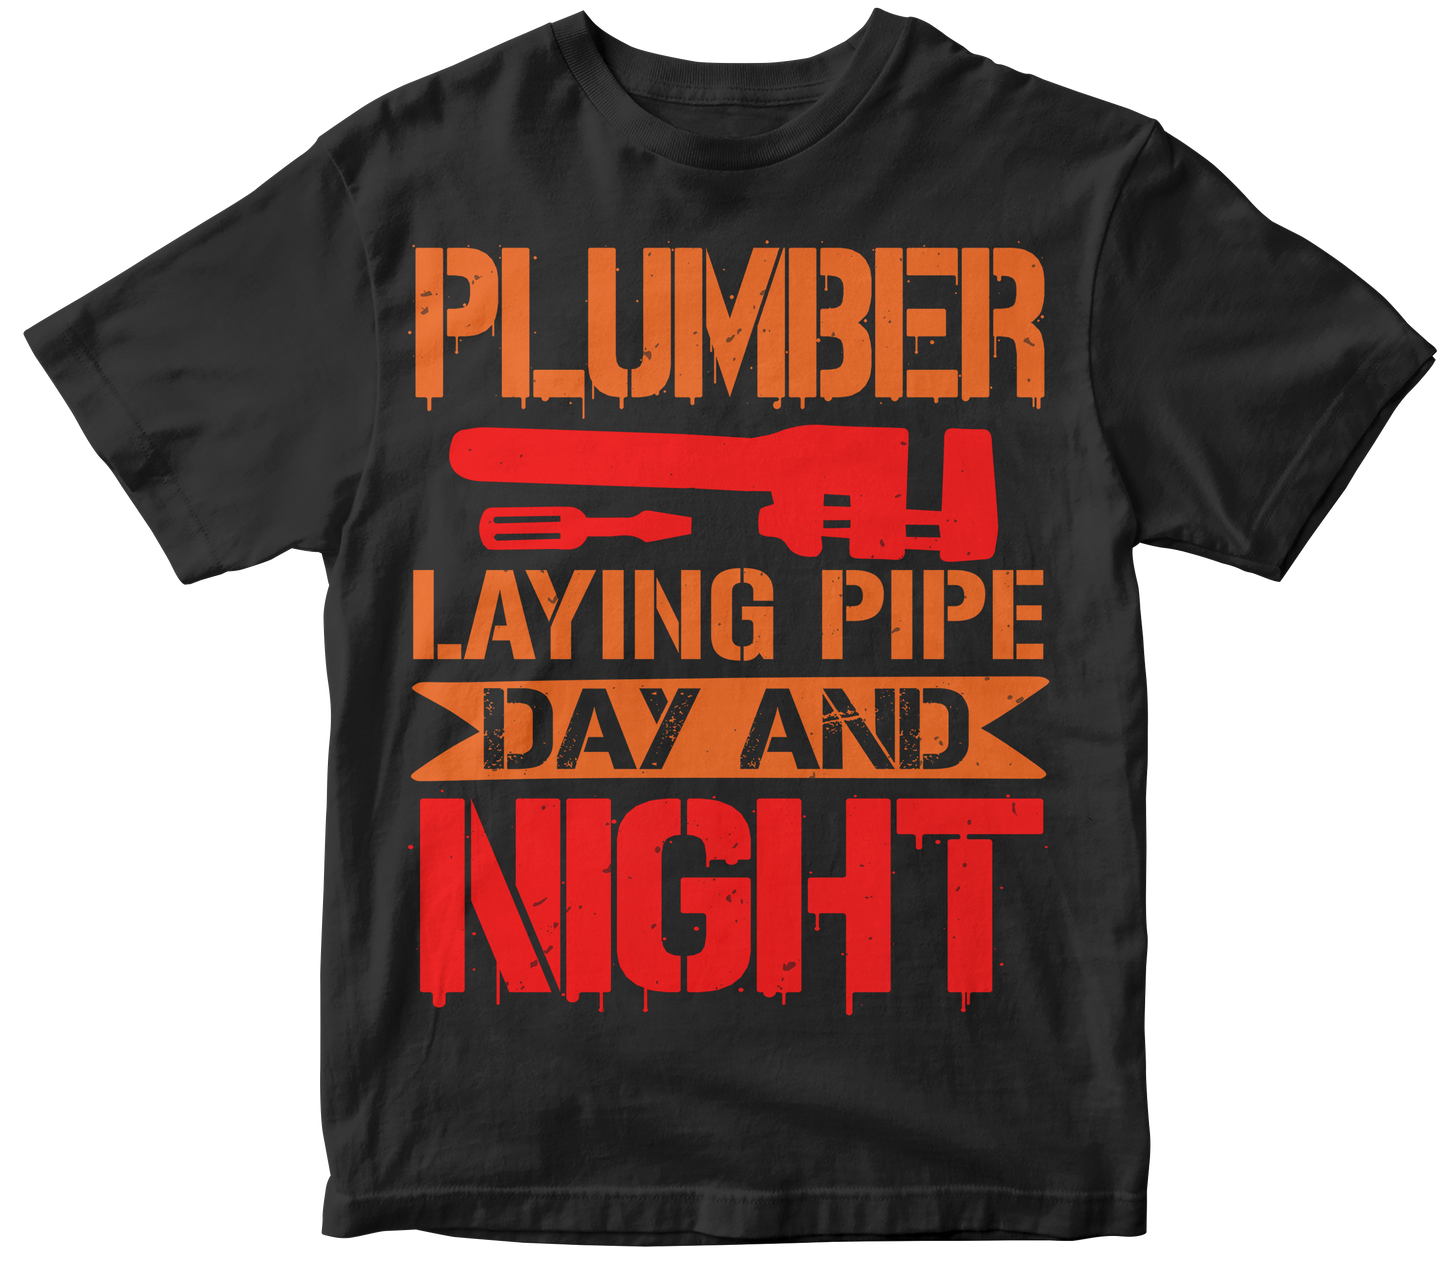 Plumber laying pipe day and night